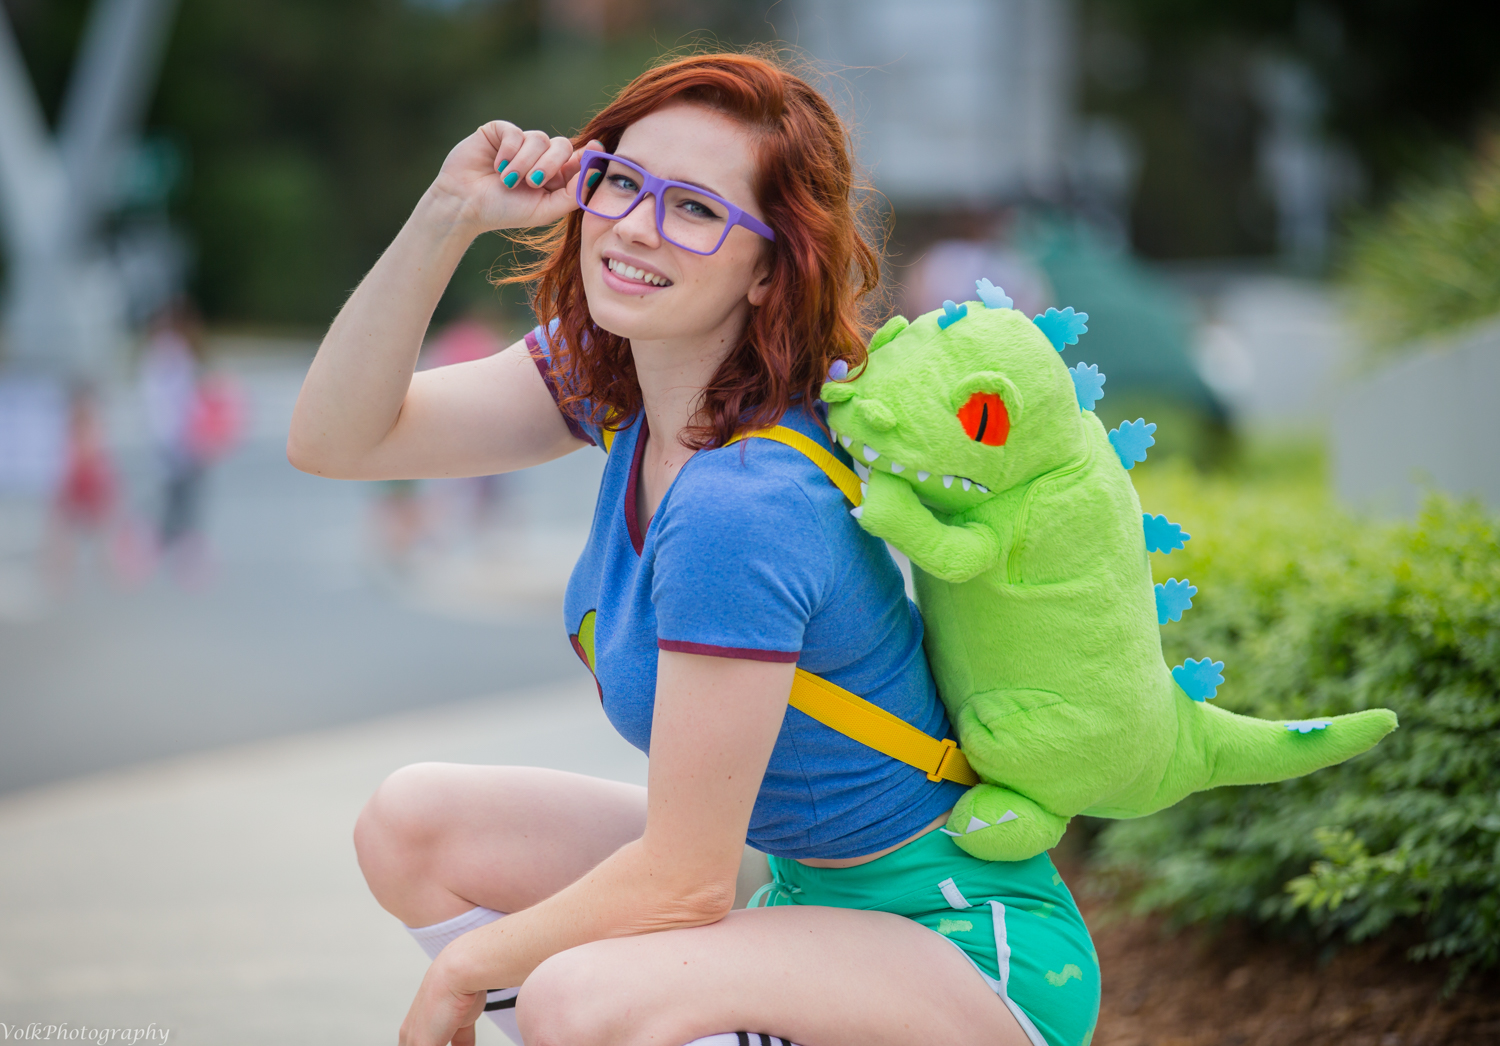 People 1500x1046 Nichameleon women model redhead fake glasses cosplay T-shirt short shorts looking at viewer squatting smiling painted nails backpacks depth of field women outdoors Chuckie Rugrats